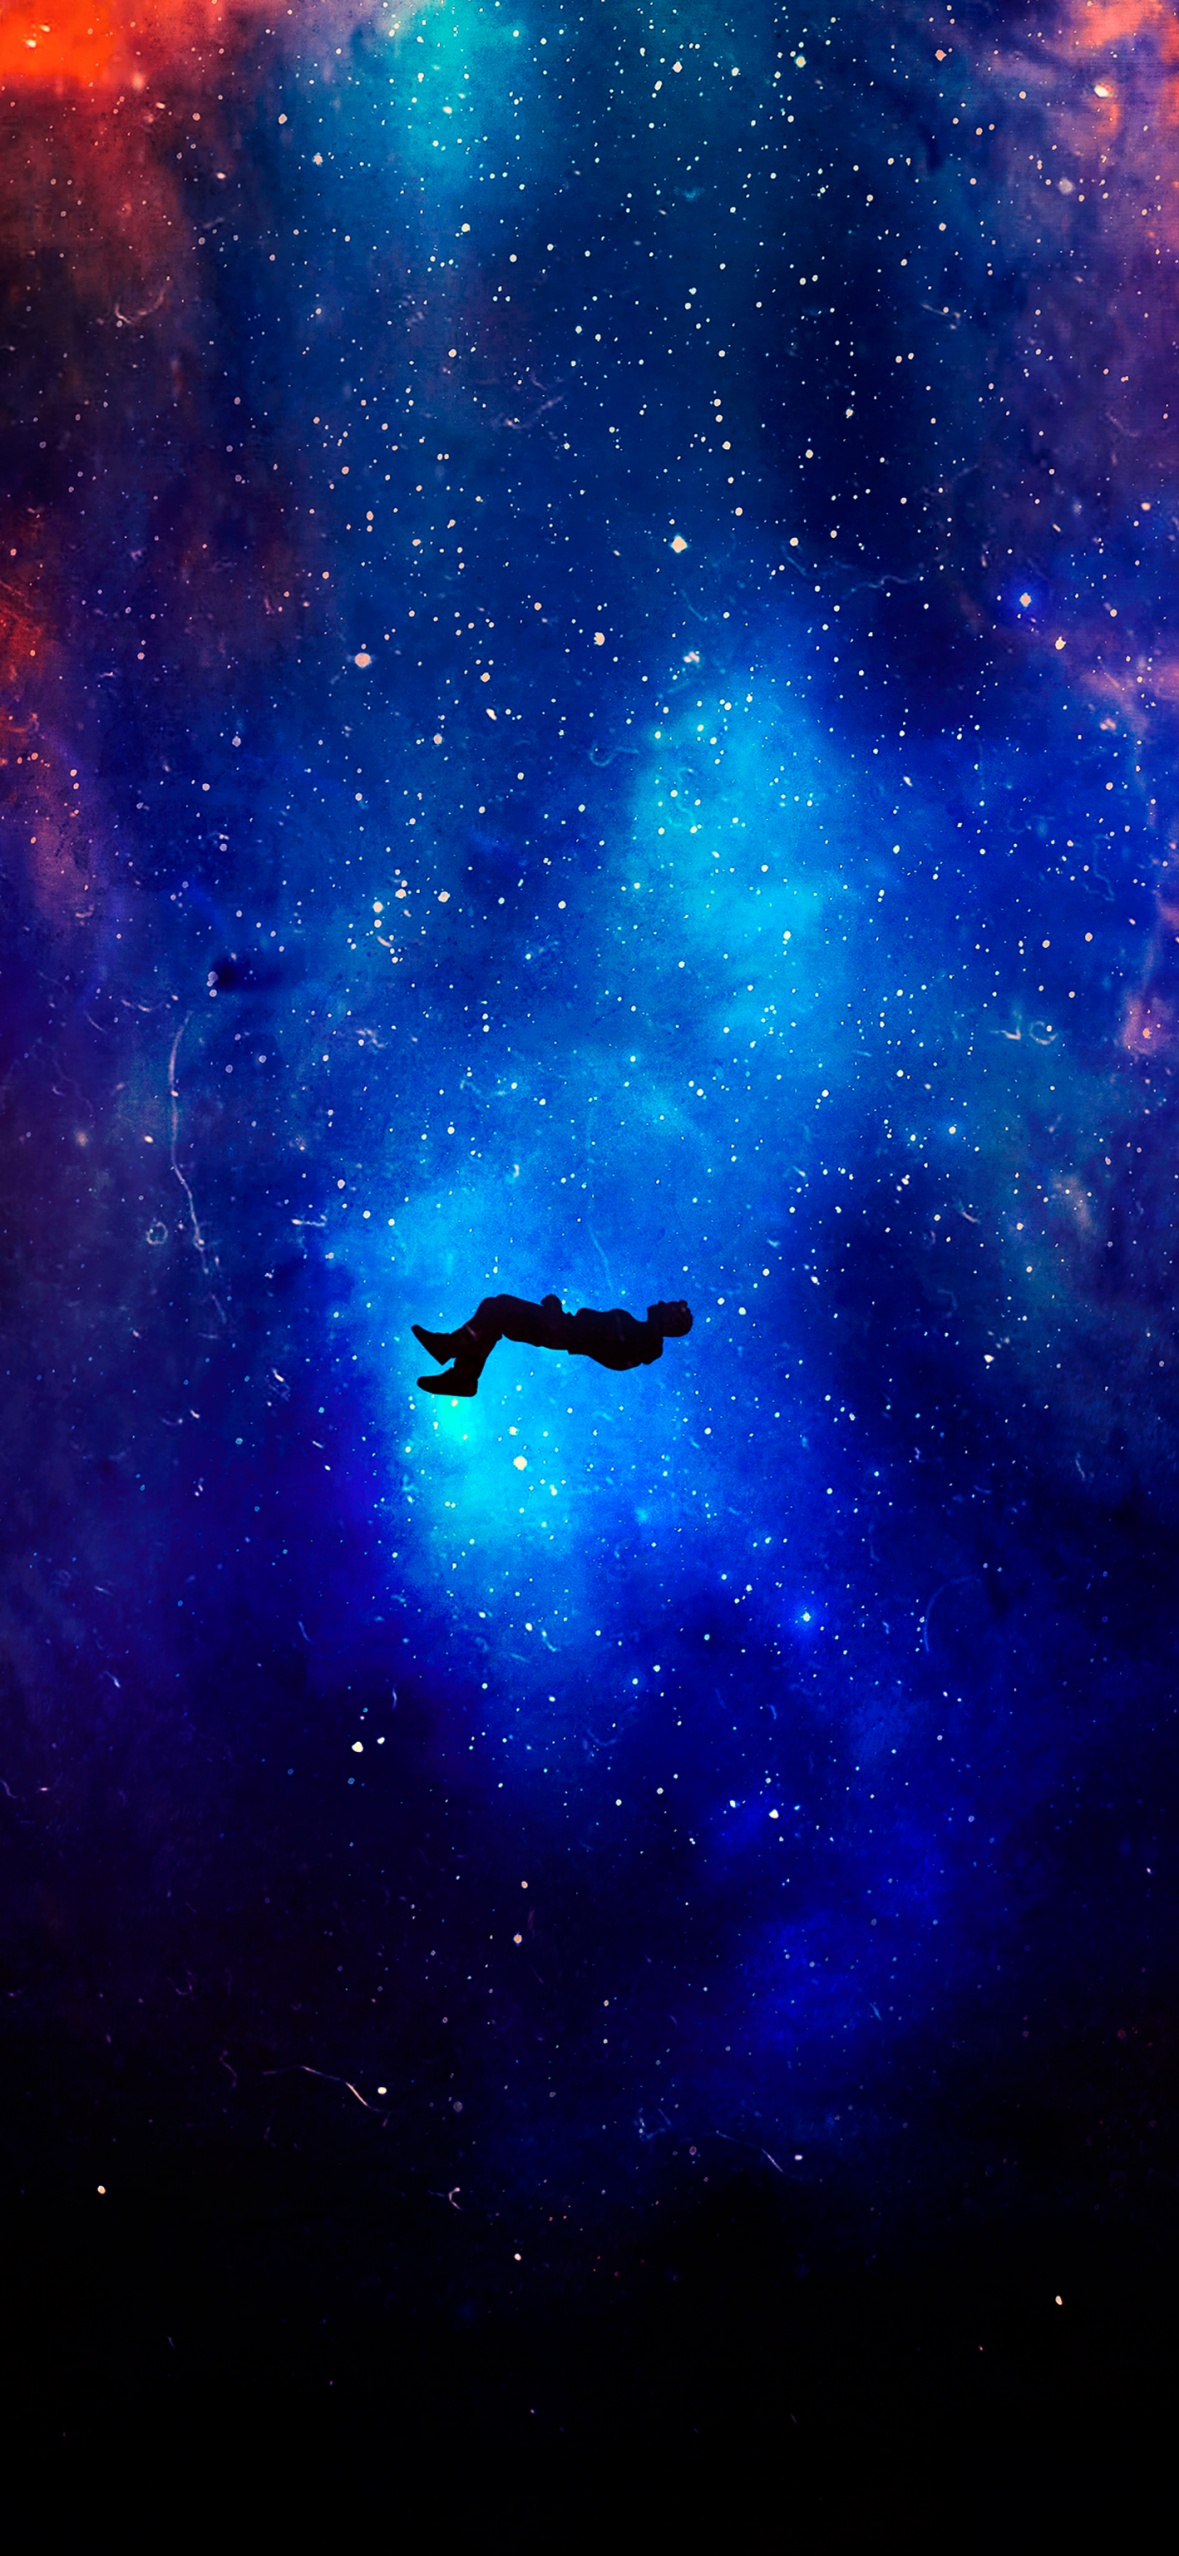 Man floating in space with stars and nebulas in the background - Space